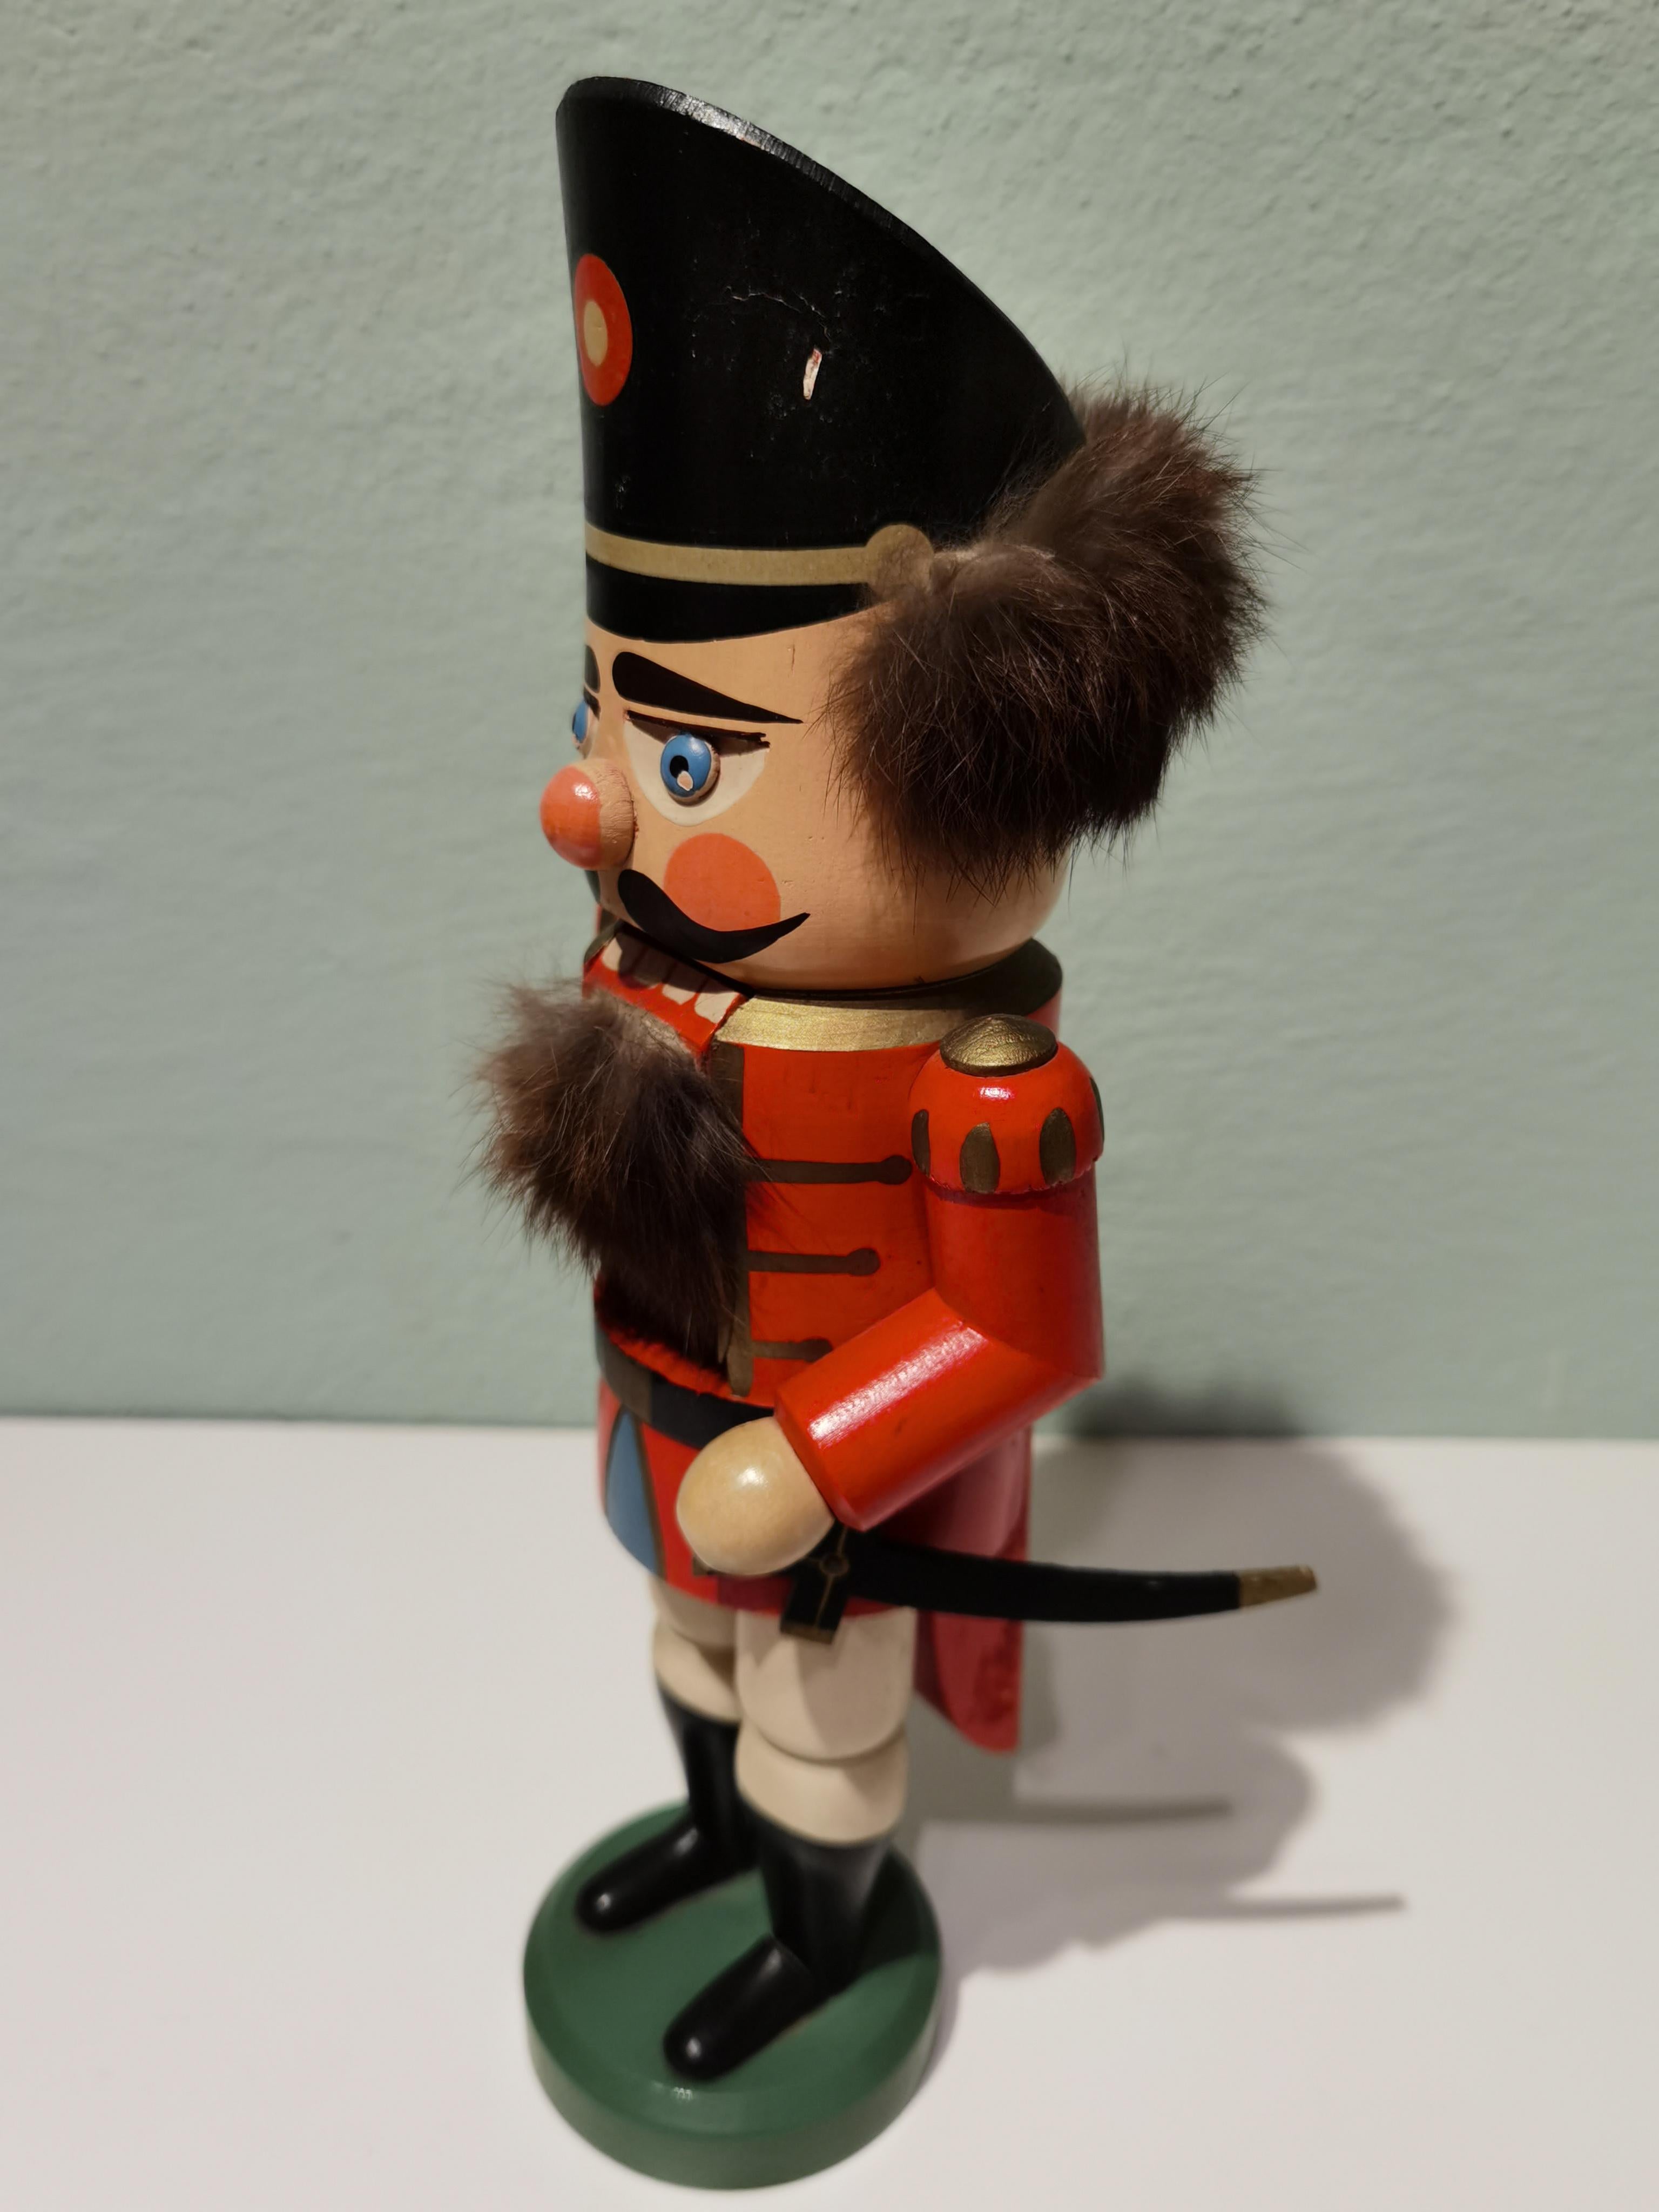 Large wooden nutcracker figure from the Erzgebirge. The region Erzgebirge formerly Eastern Germany is famous for this special kind of nutcrackers where intricate carving has been their home. Completely hand-painted in bright red colors and decorated